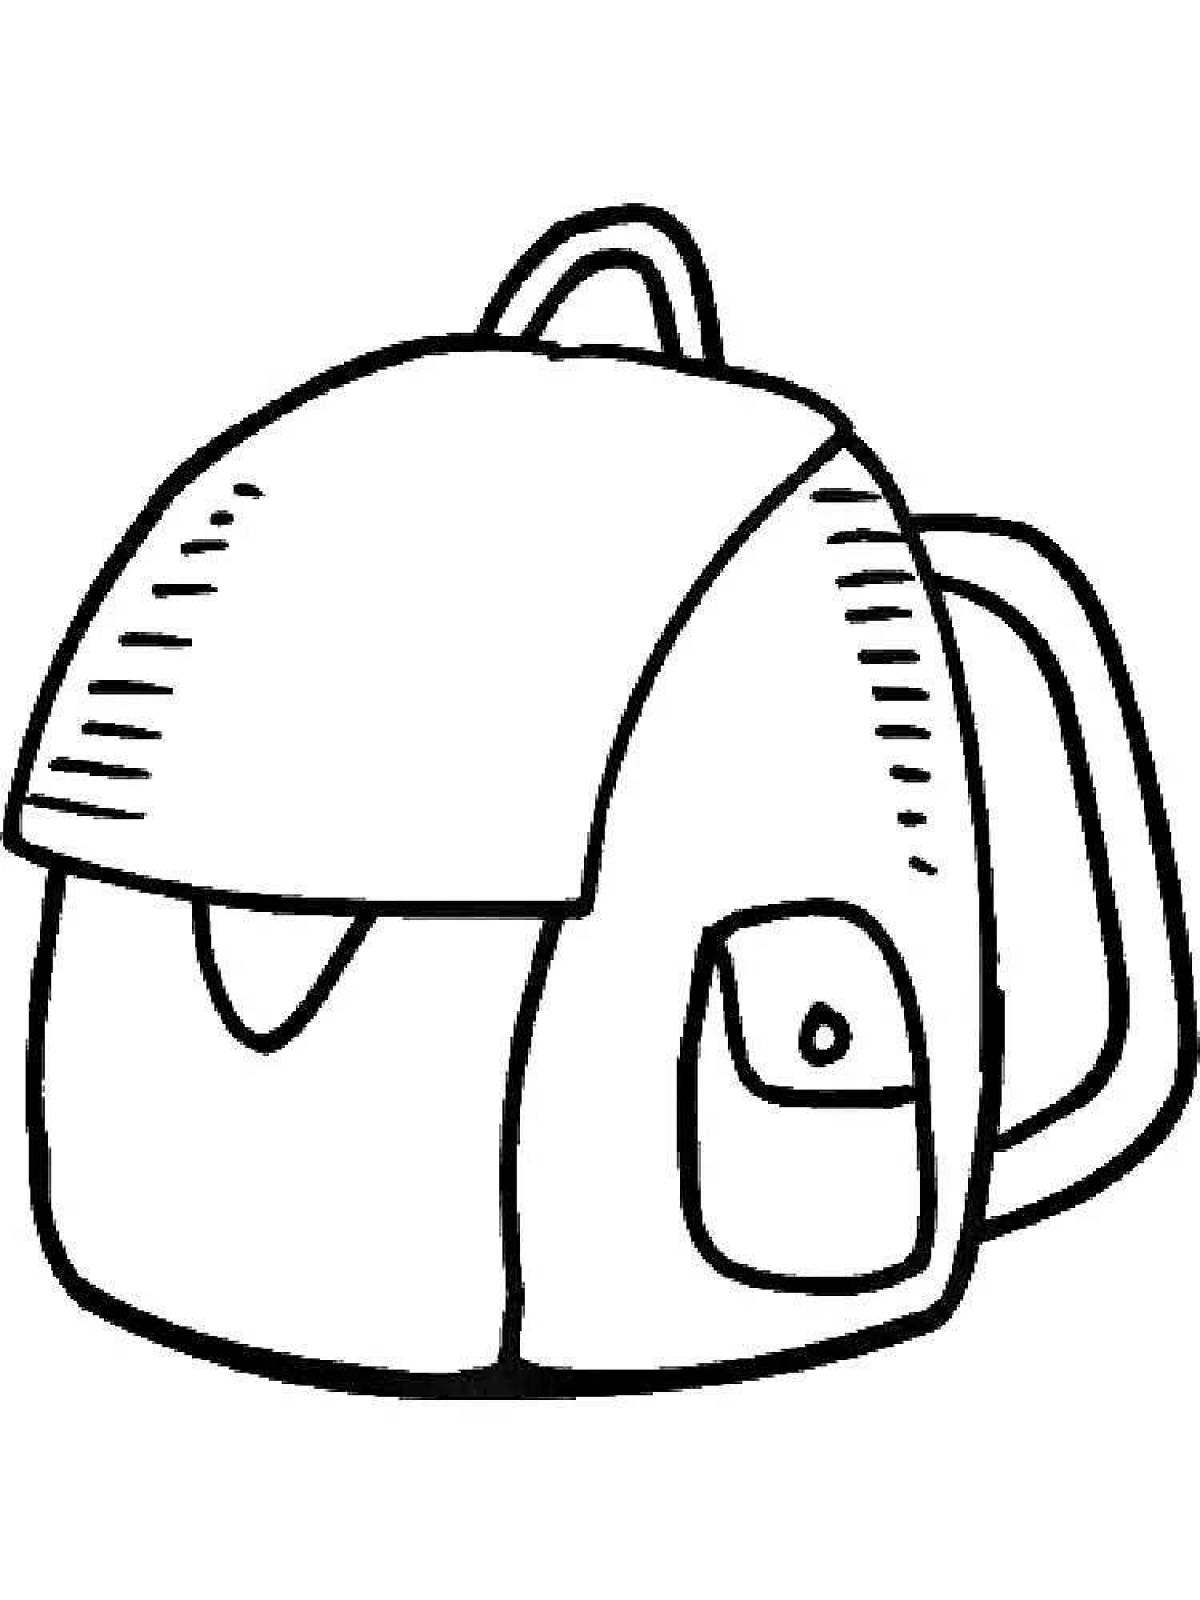 Colorful and joyful backpack coloring for children